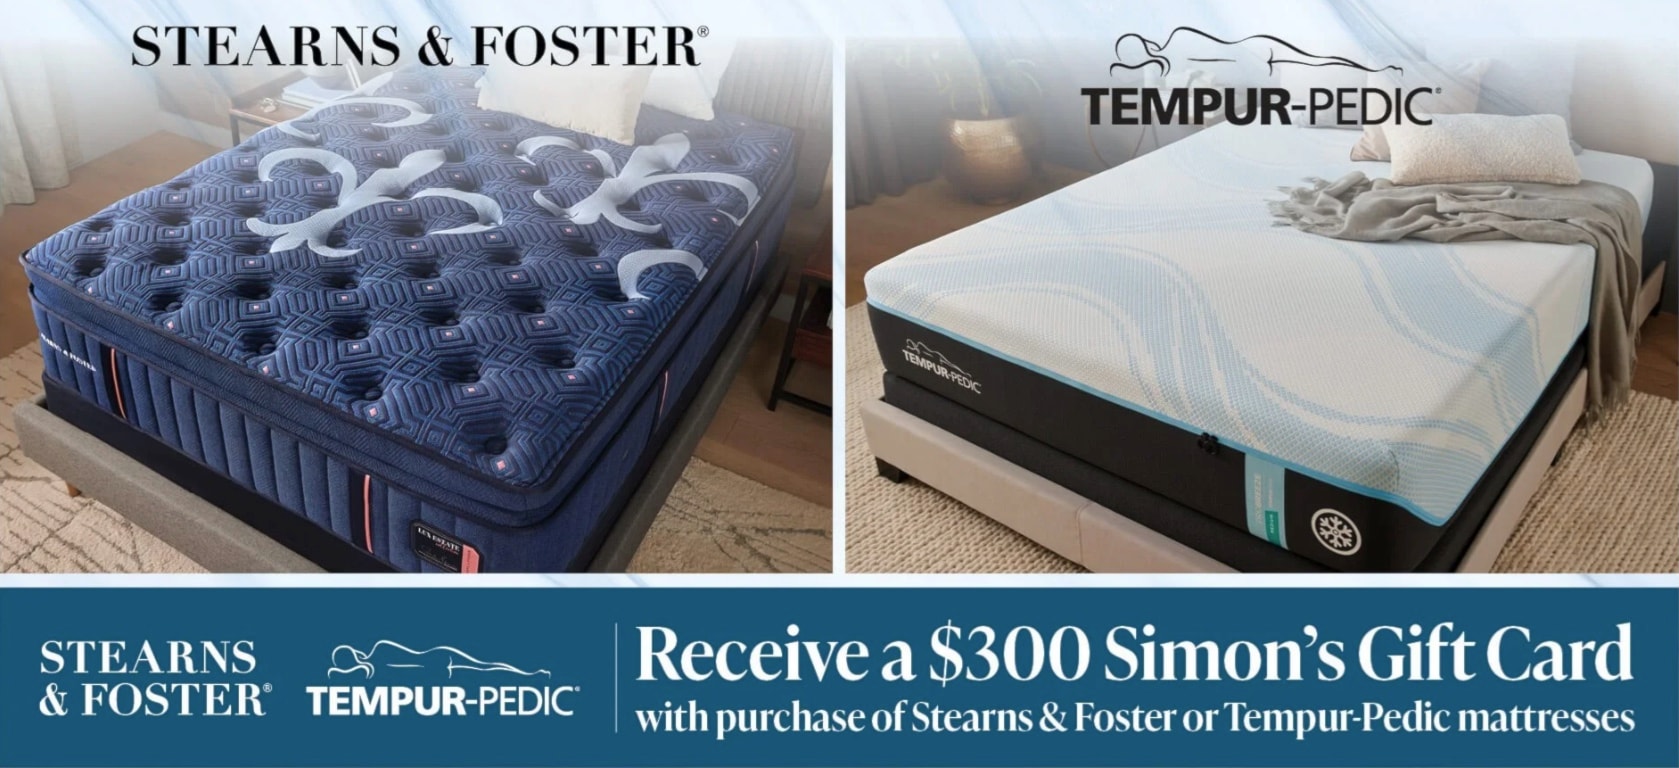 Receive a $300 Simon's gift card with a Stearns and foster or tempurpedic mattress